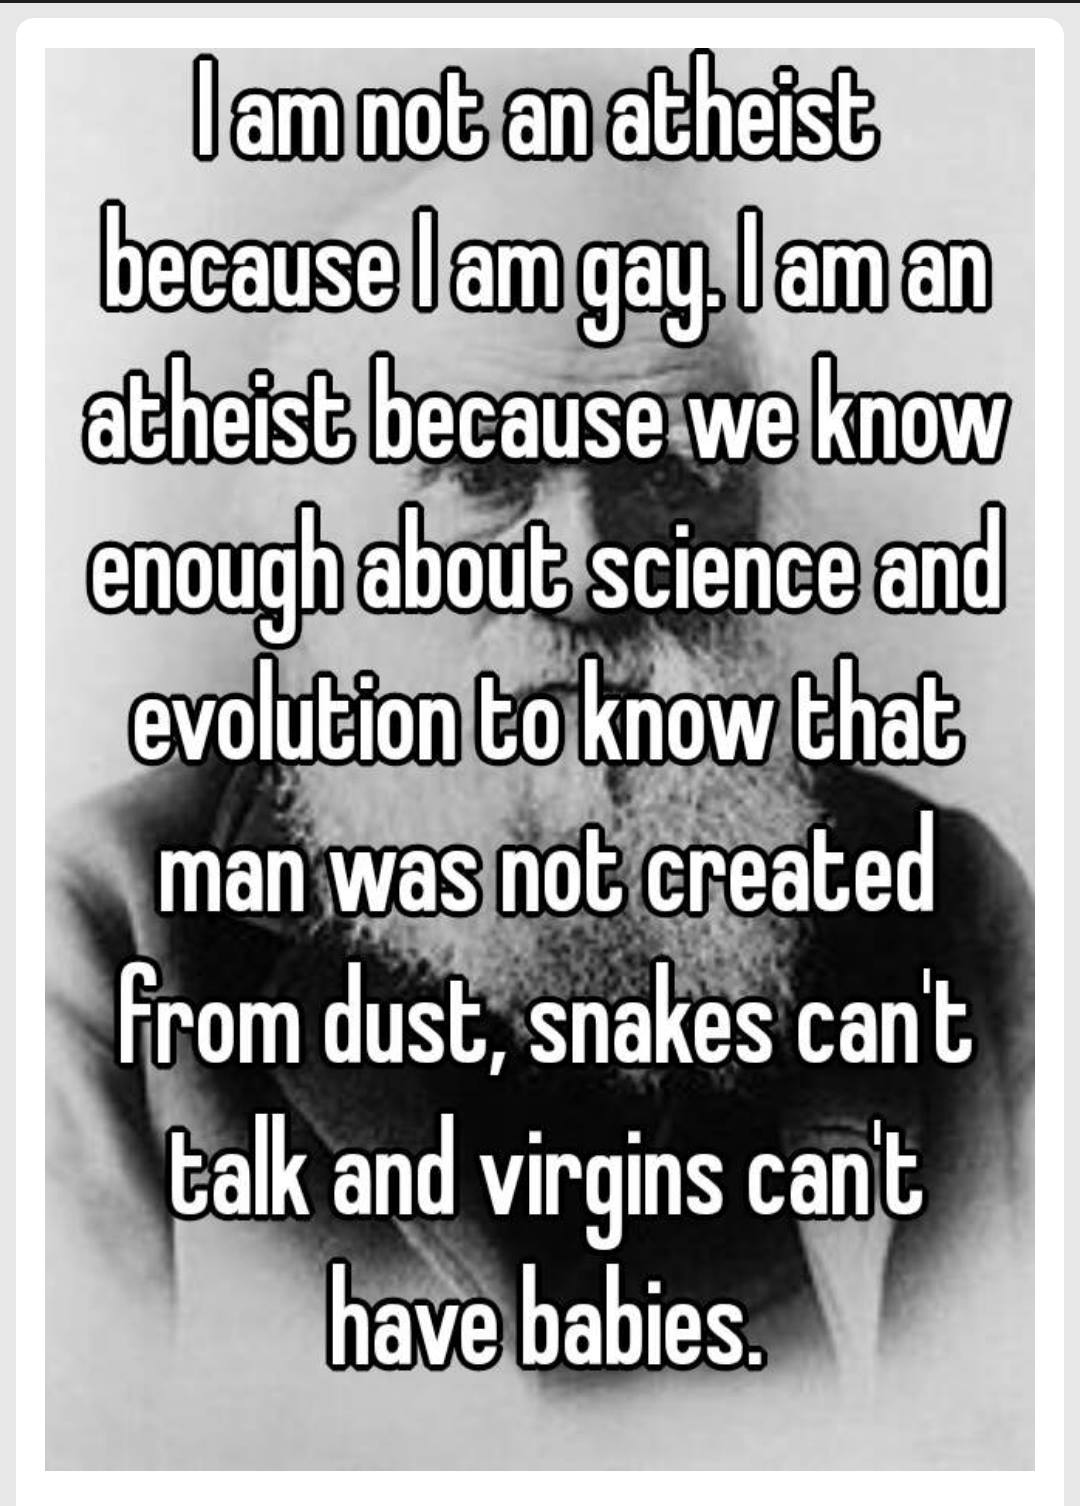 i am not an atheist because i am gay, i am an atheist because we know enough about science and evolution to know that man was not created from dust, snakes can't talk and virgins can't have babies